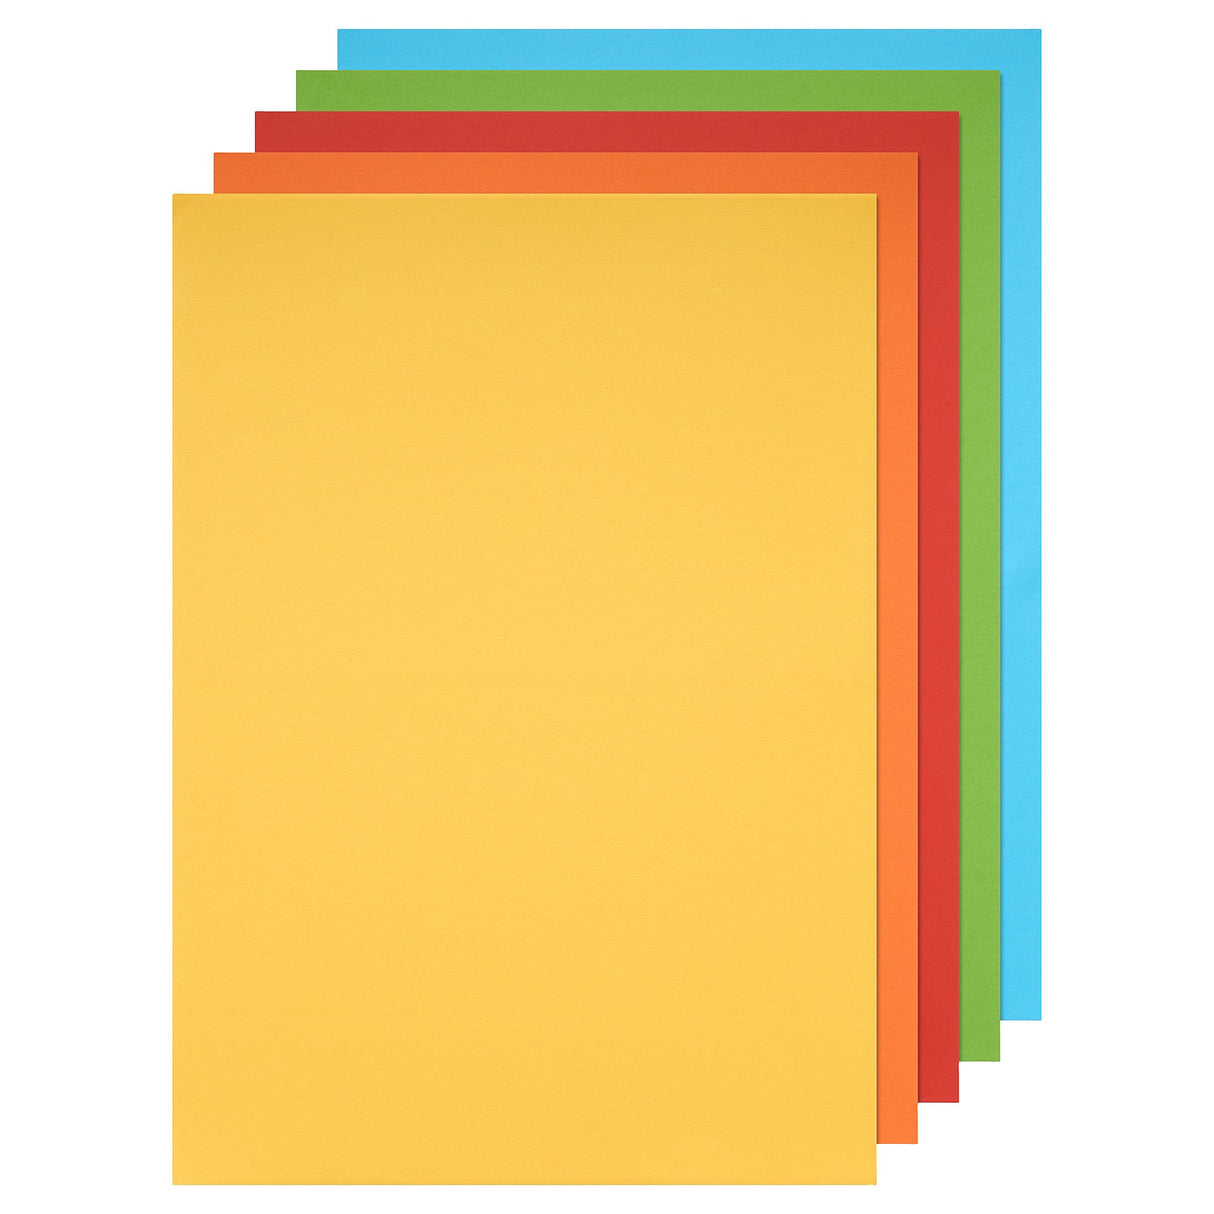 Premier Activity A3 Card - 160gsm - Rainbow - 200 Sheets | Stationery Shop UK